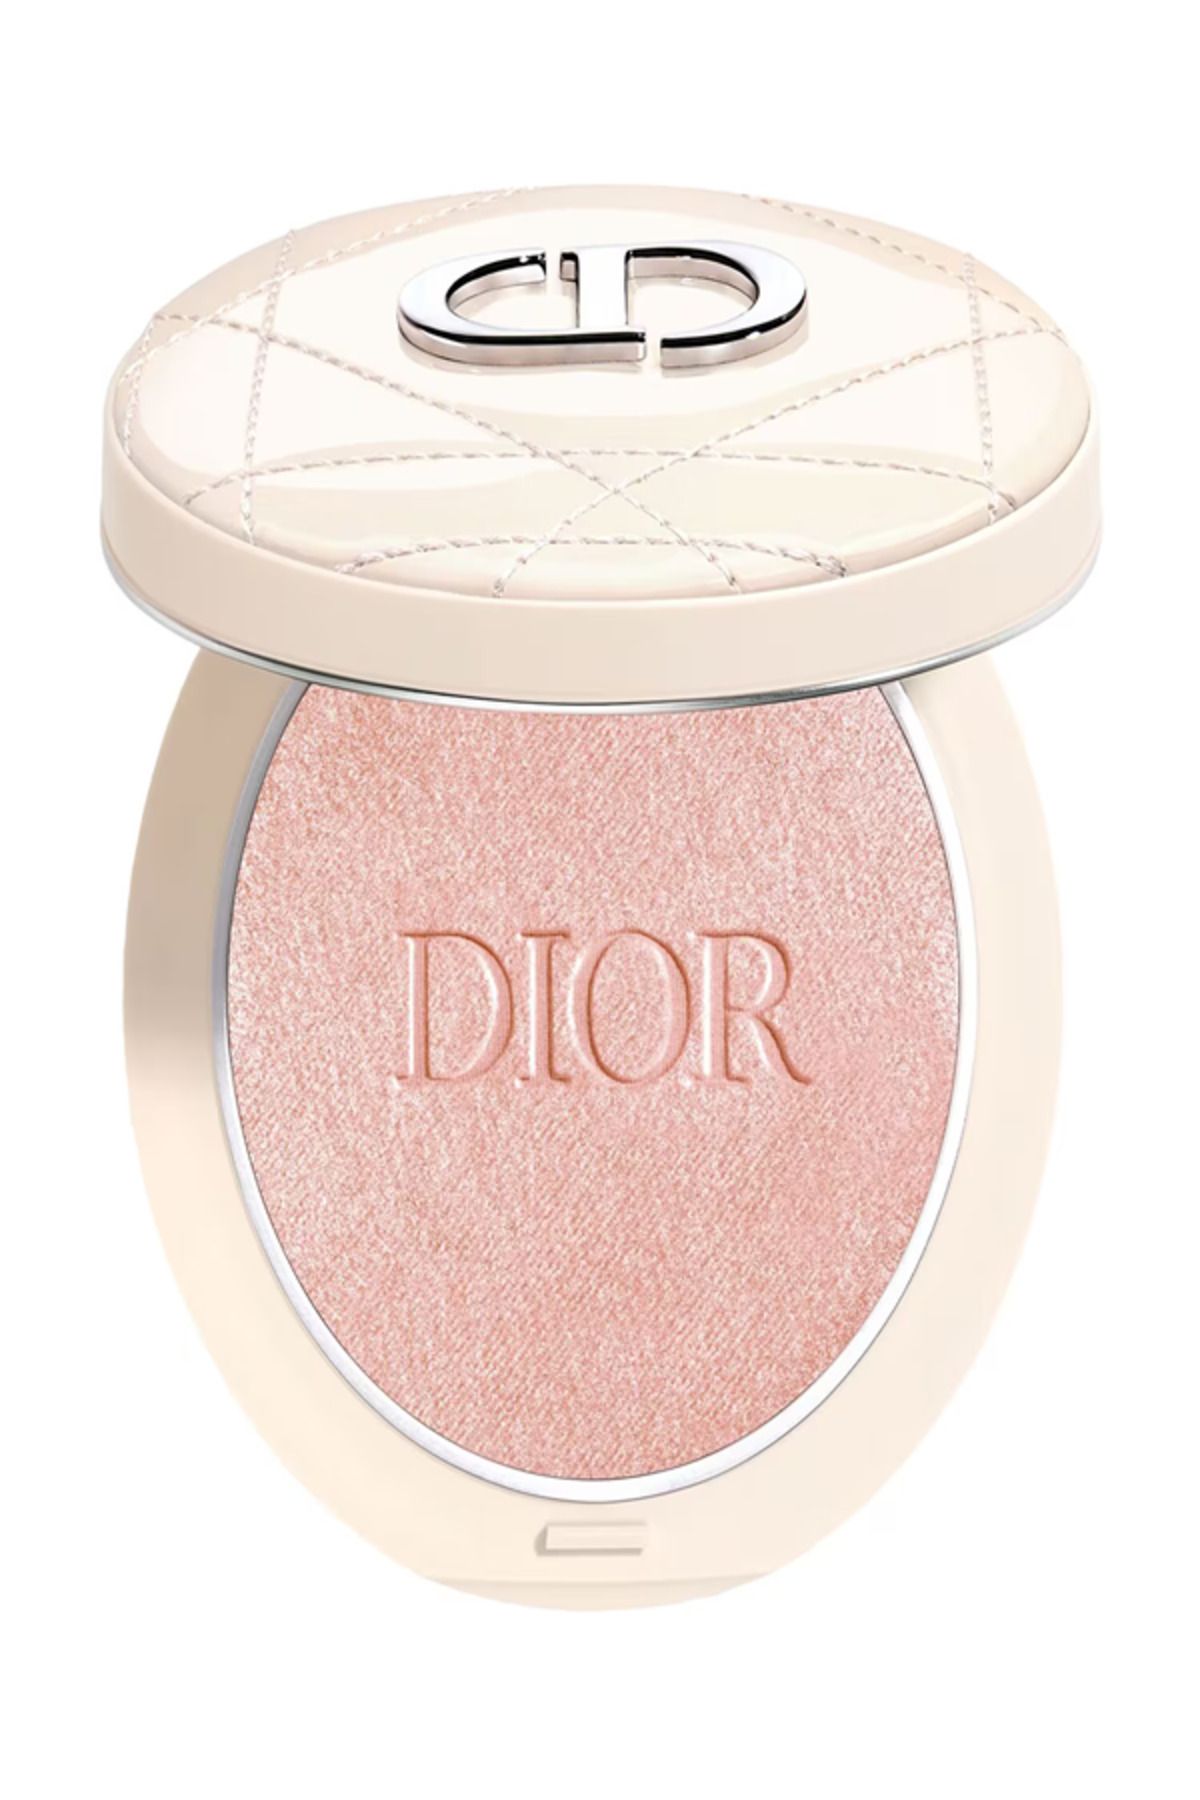 Dior FOREVER COUTURE LUMİNİZER HİGHLİGHTER - İNTENSE COLOR ILLUMİNATİNG POWDER PSSN2444